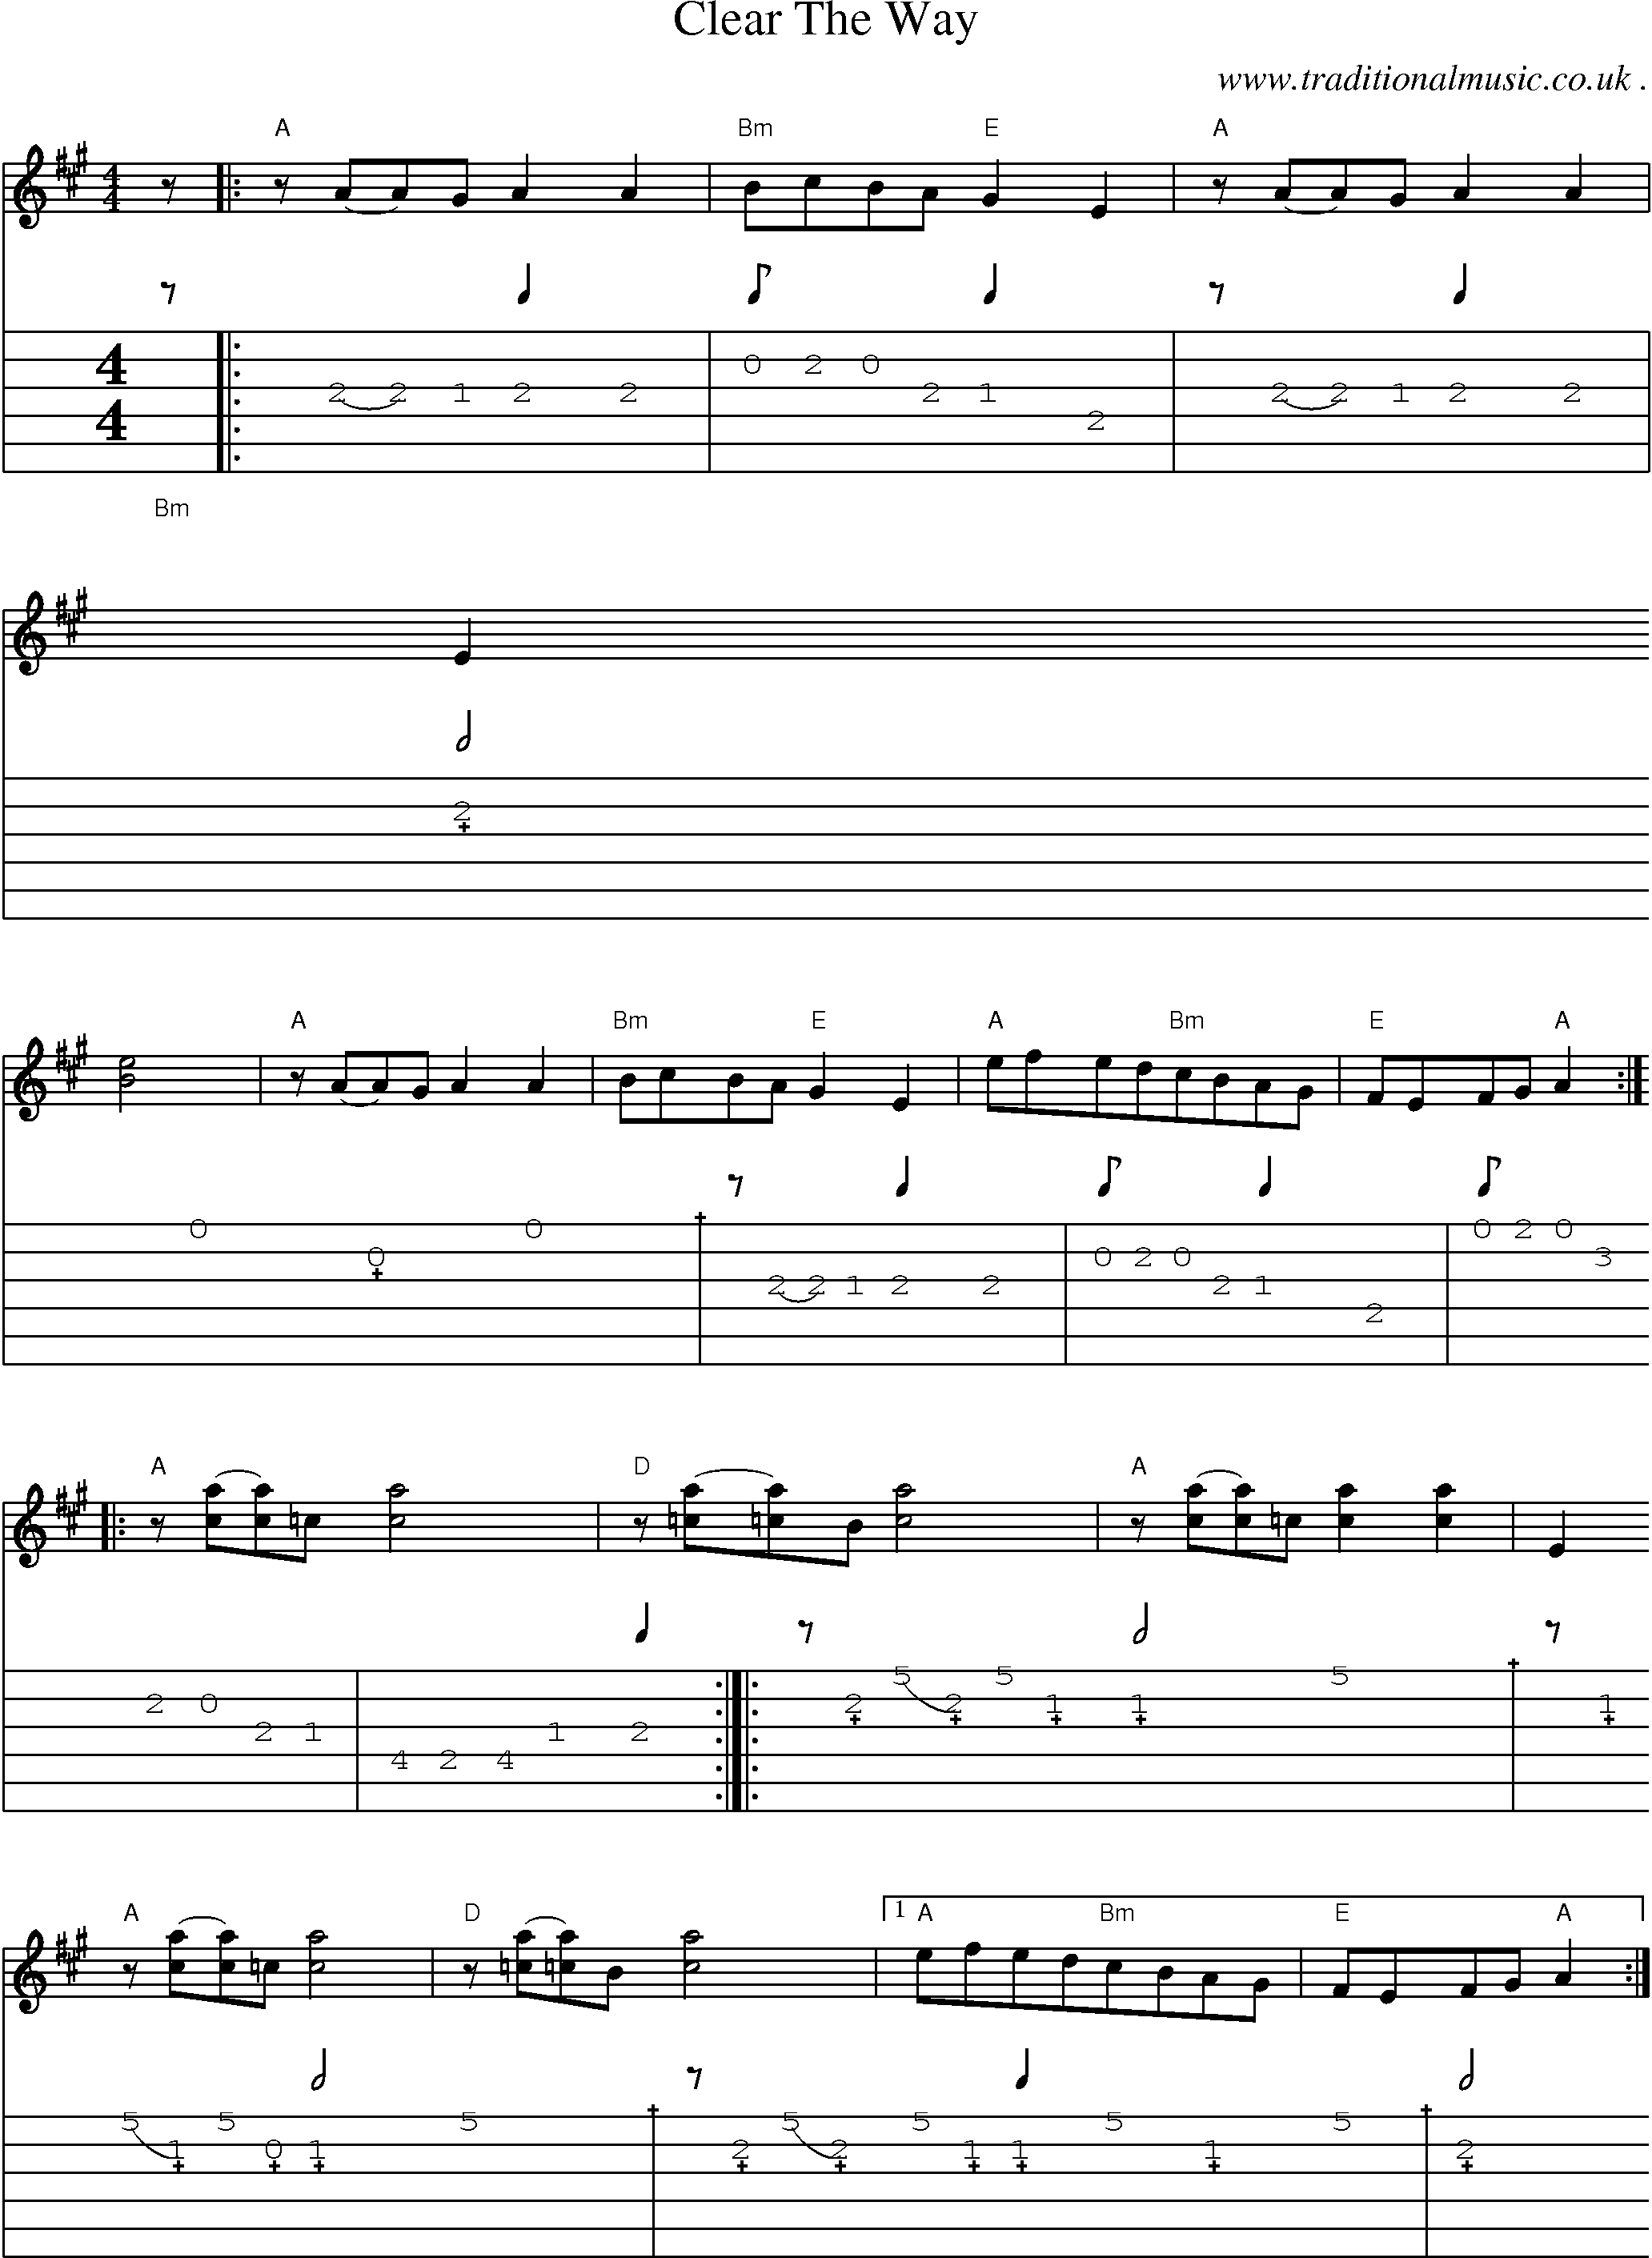 Sheet-Music and Guitar Tabs for Clear The Way